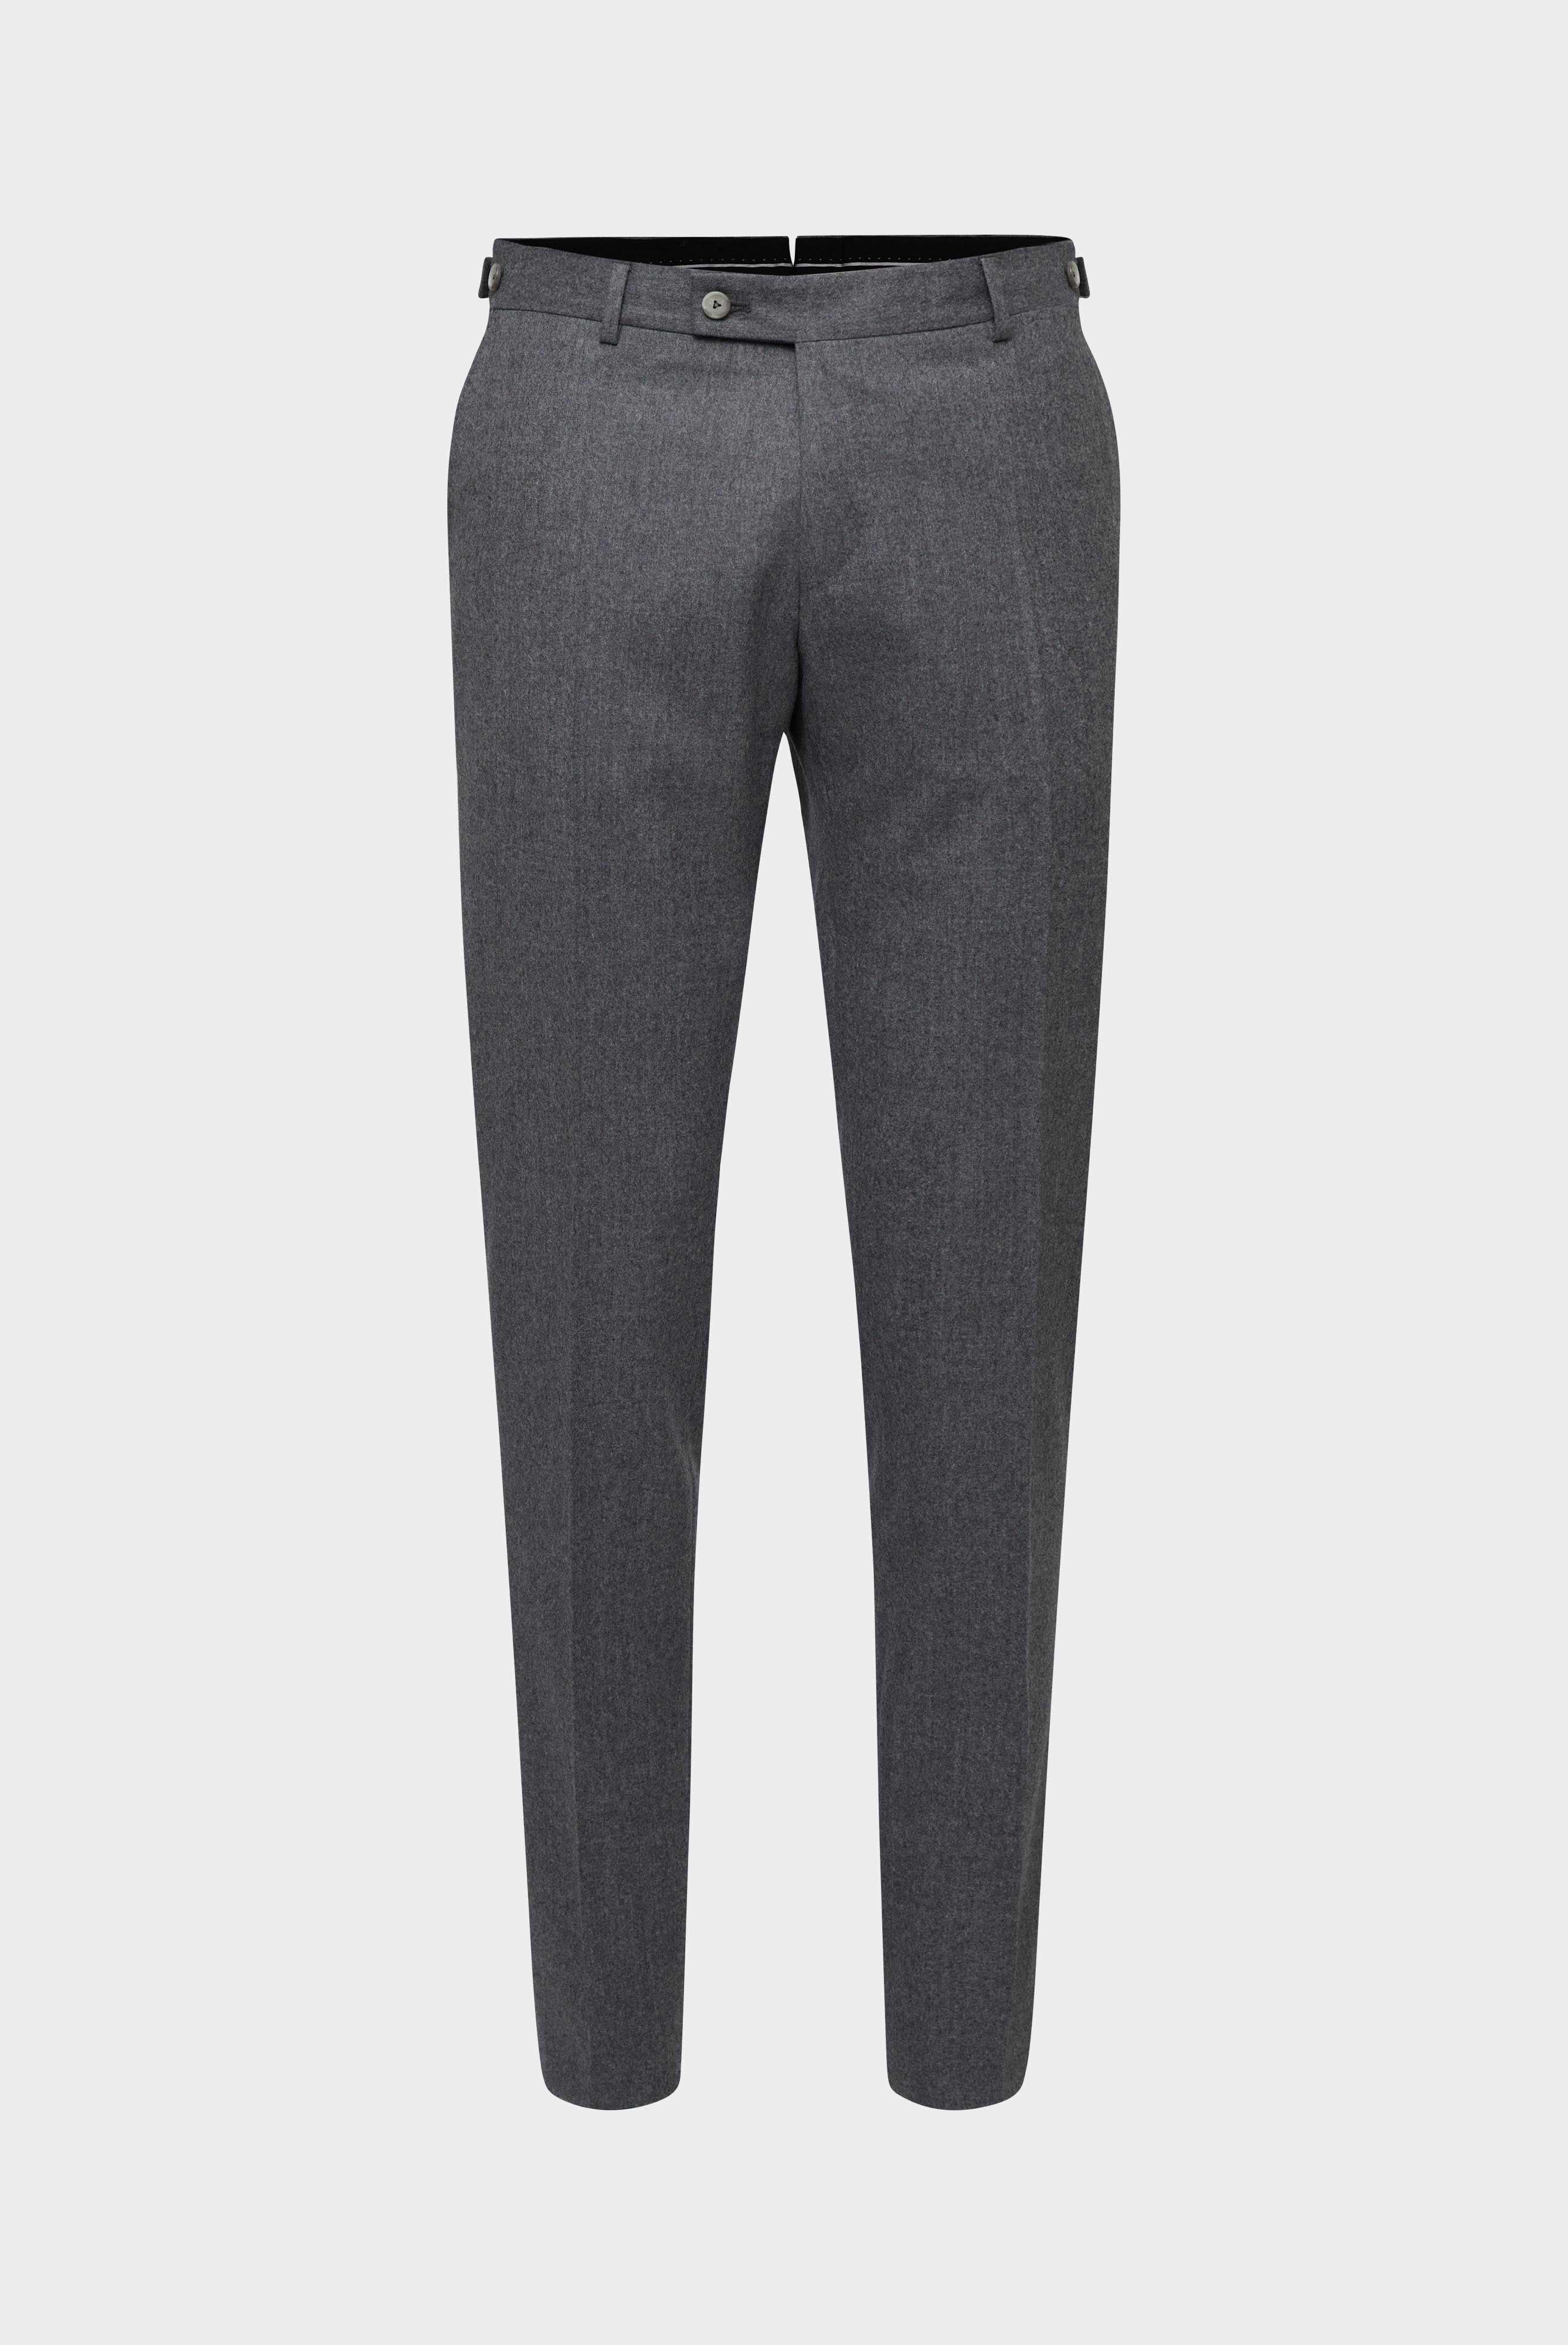 Jeans & Trousers+Wool-Flanell Trousers Slim Fit+20.7854.16.H00029.040.50